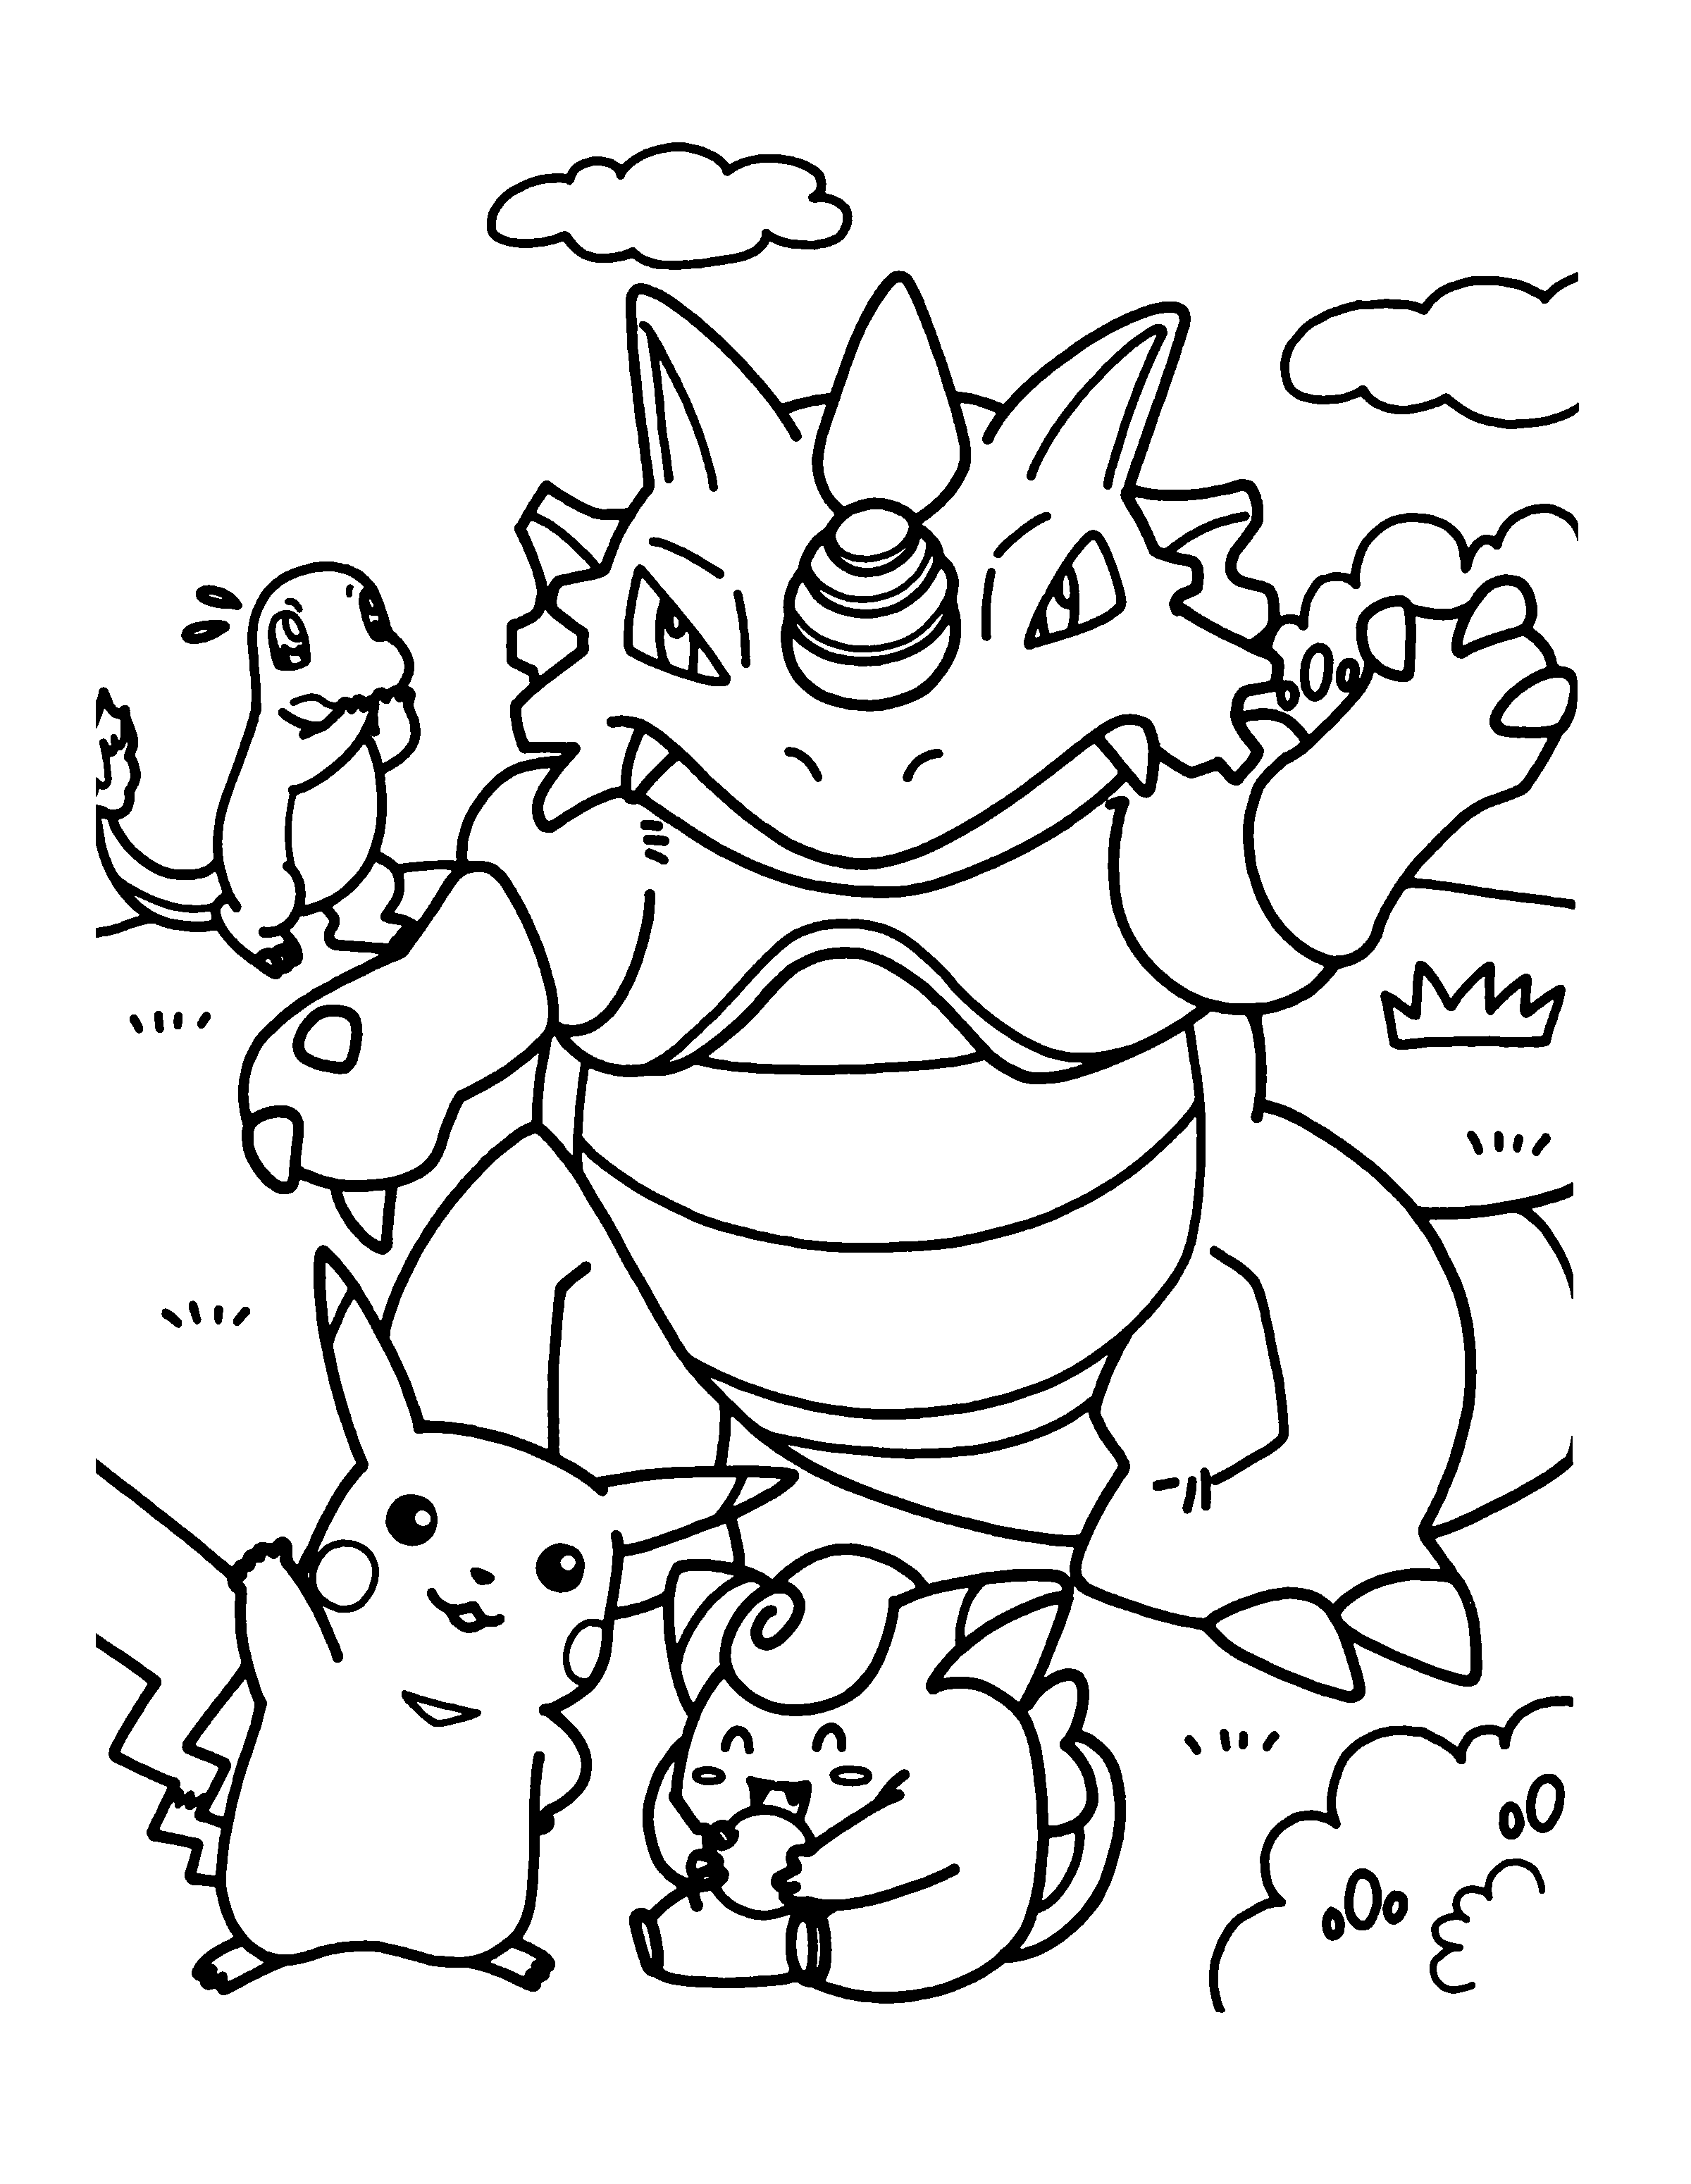 Pokemon Black And White 2 Printables - Coloring Pages for Kids and ...